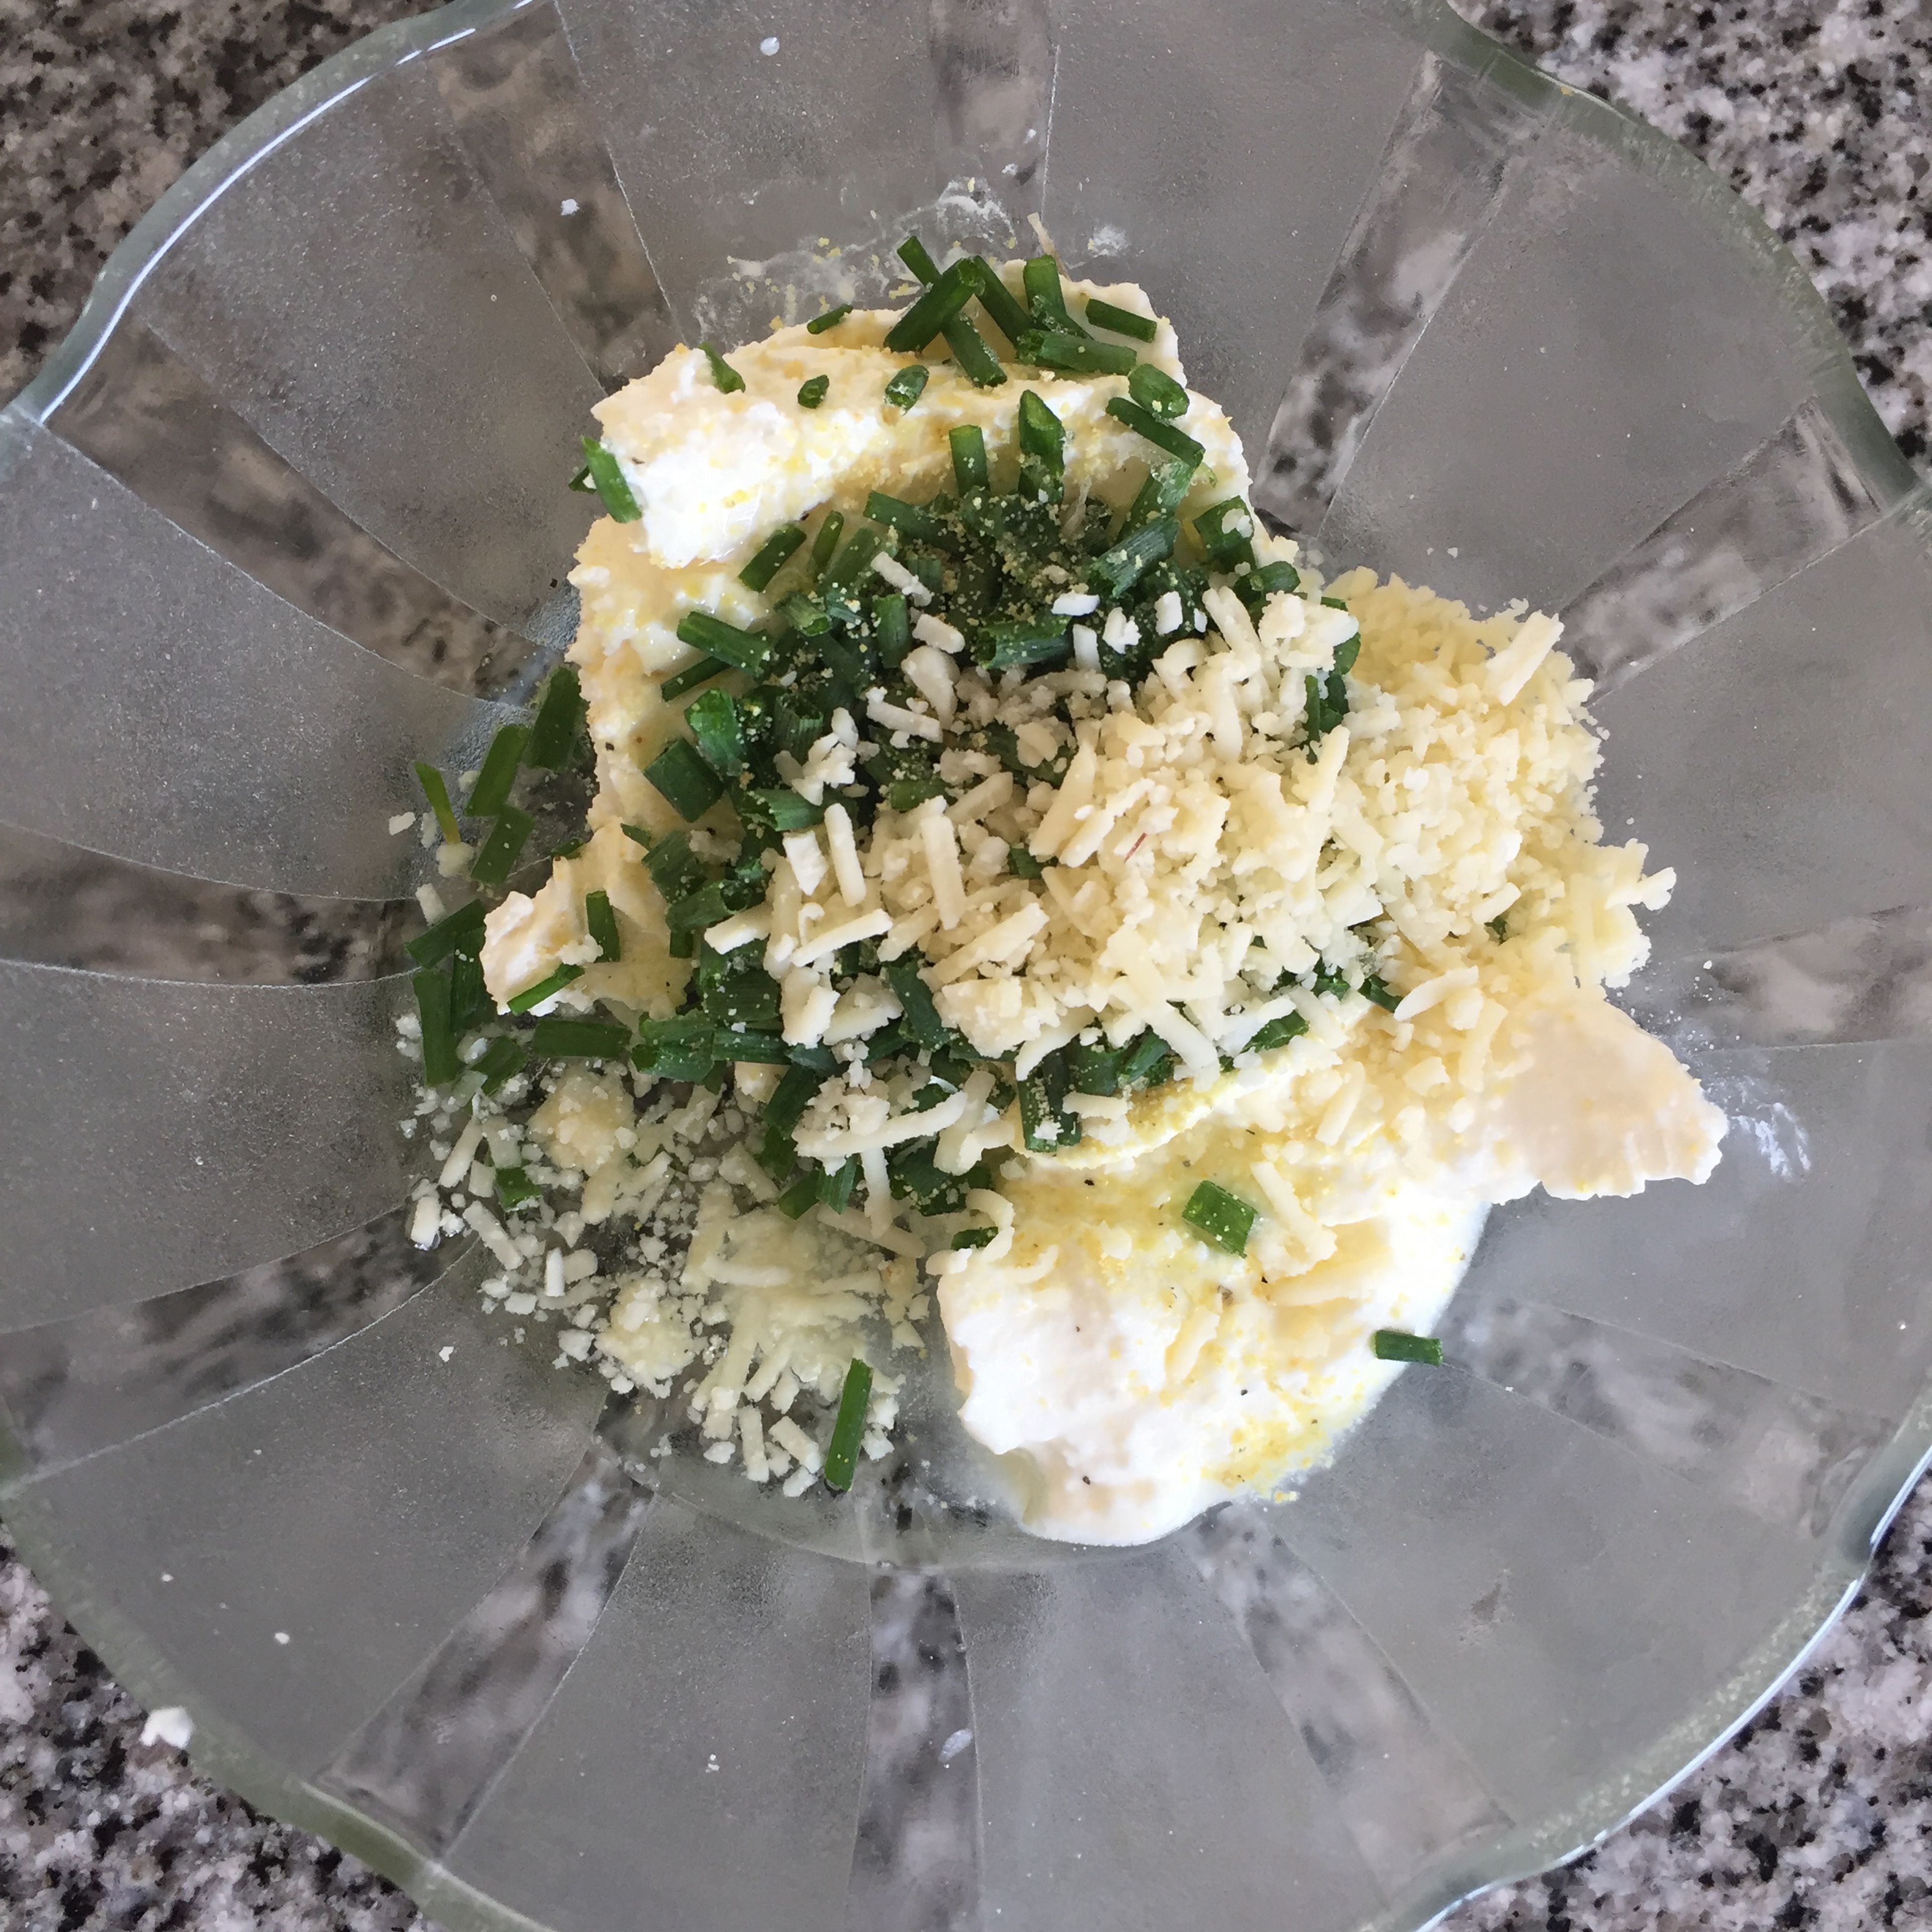 in a bowl, combine cream cheese, chives, shredded parmesan and oil, and stir until creamy.